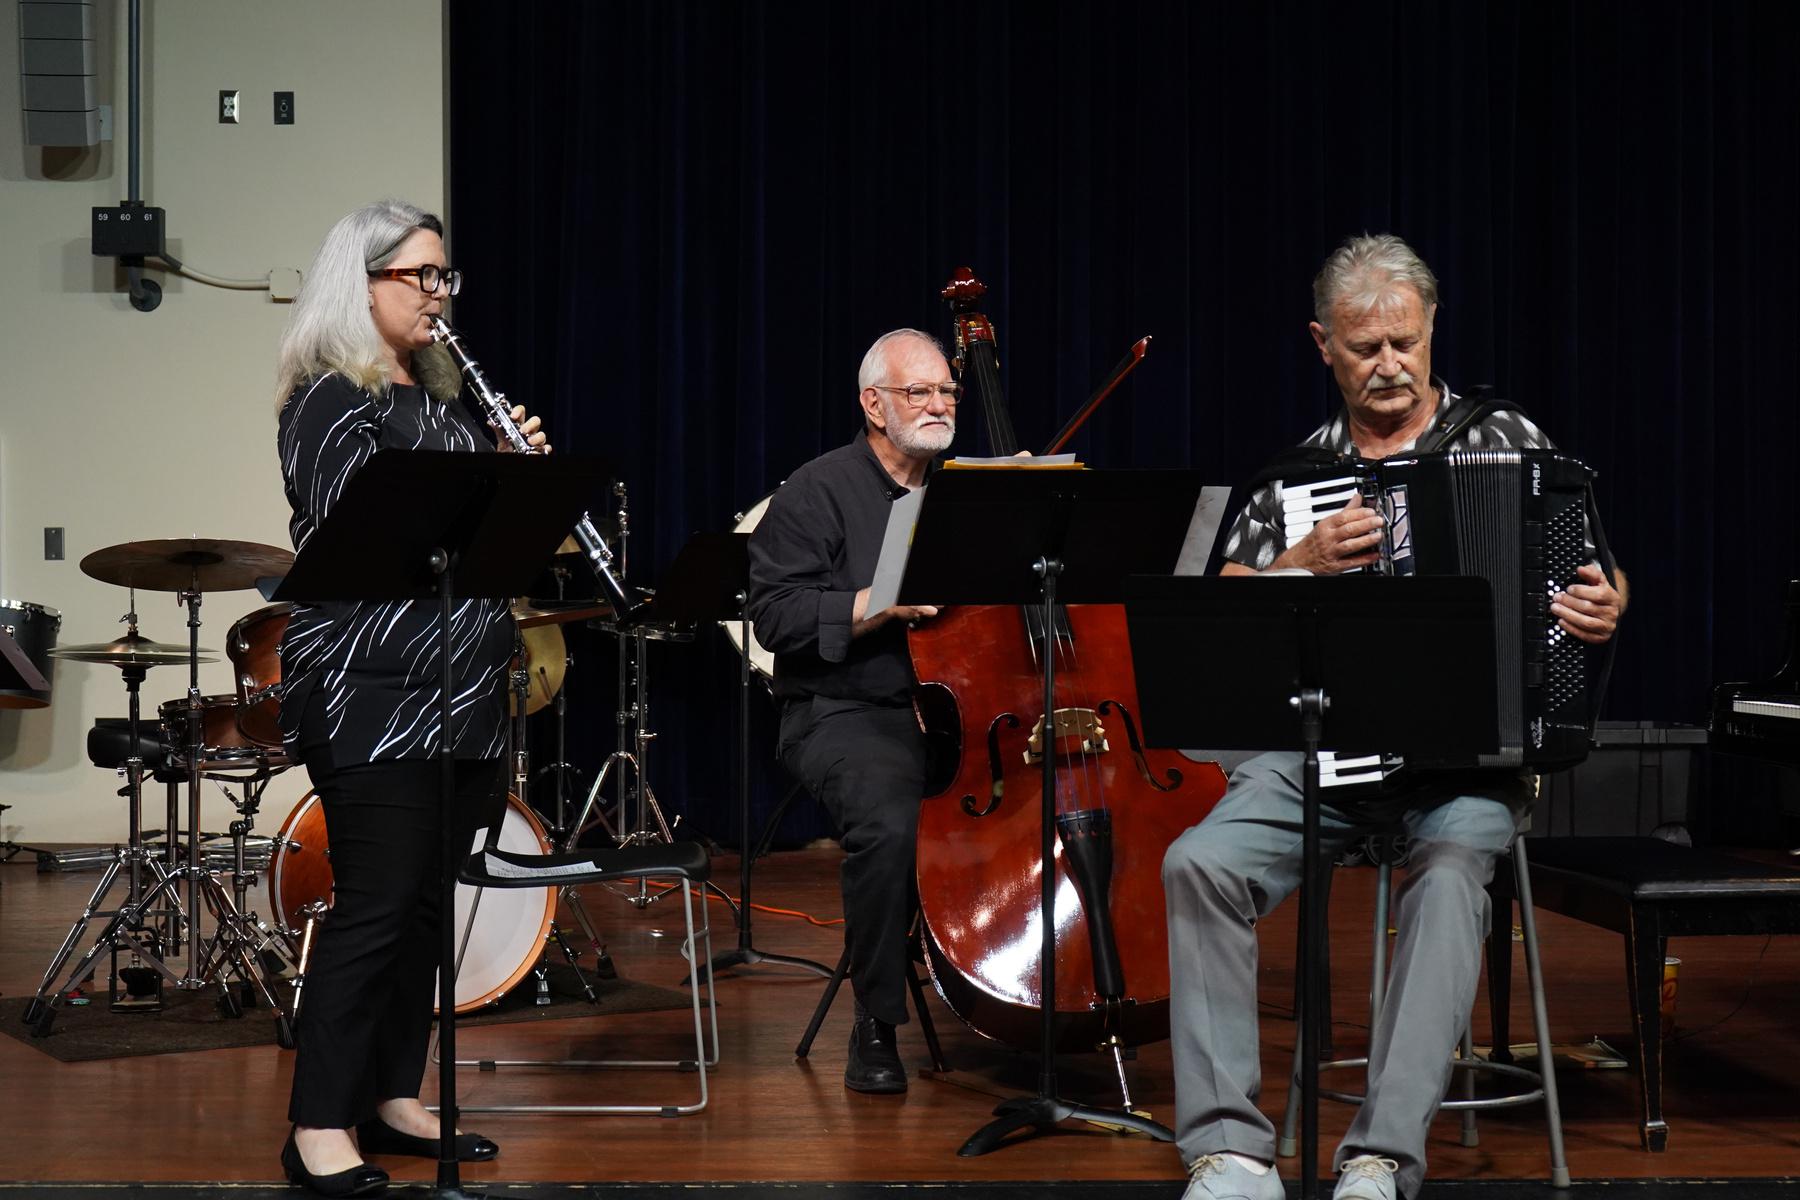 Left to right: Margaret Worsley on clarinet, Dr. Robert Berry on bass viola, and Alex Lavruk on accordion